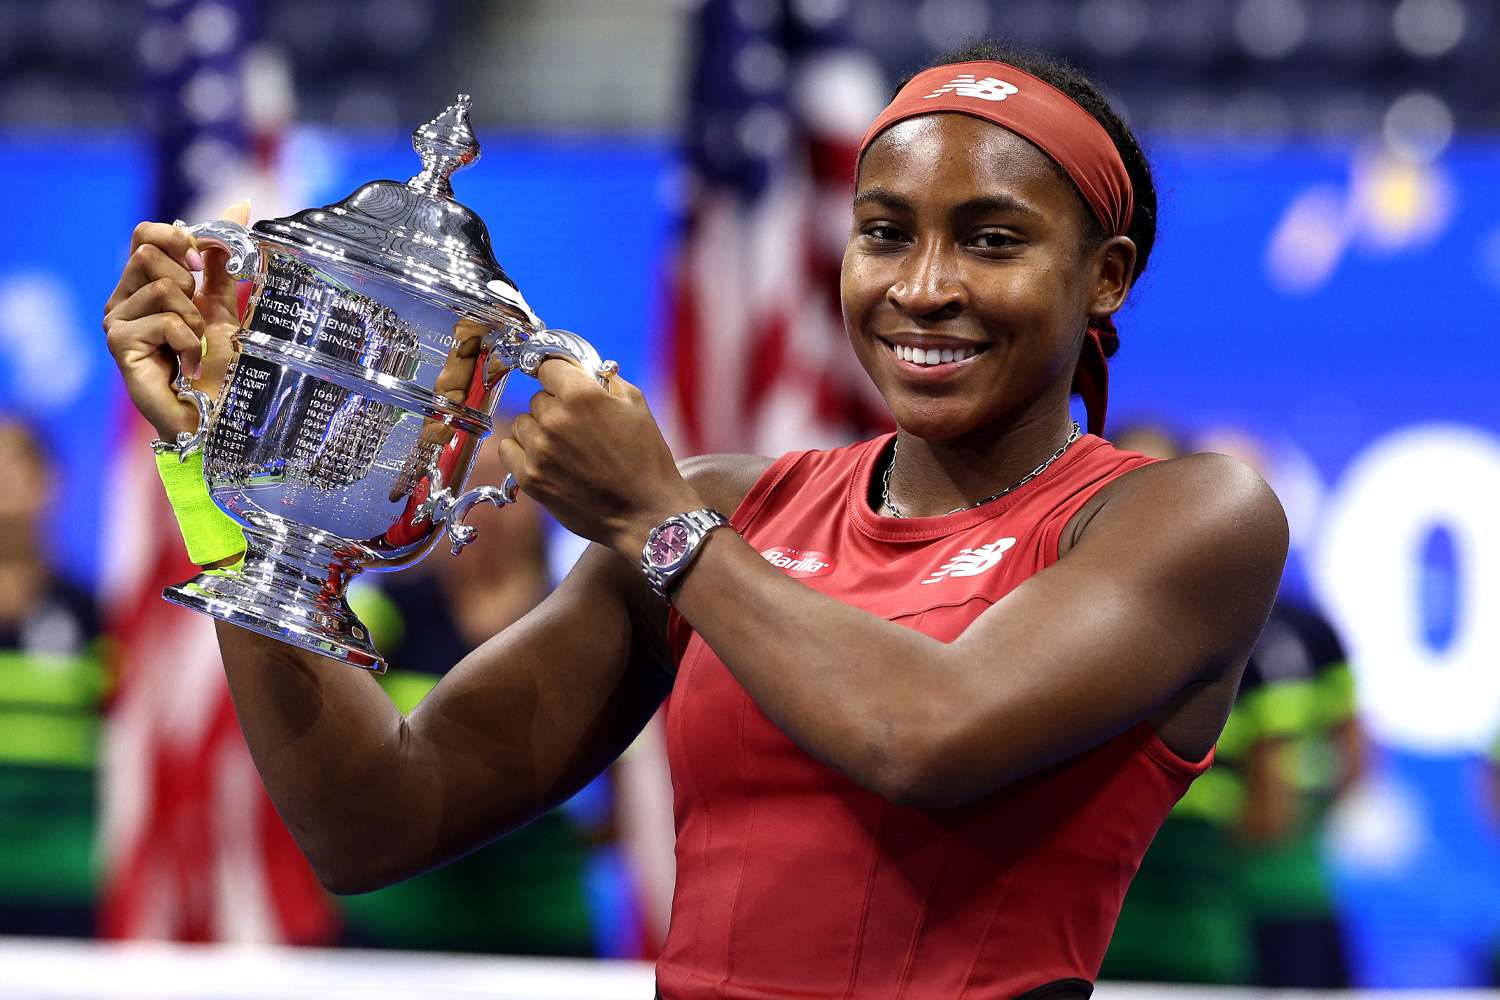 newly-crowned-us-open-champion-coco-gauff-celebrates-victory-with-a-good-nights-sleep